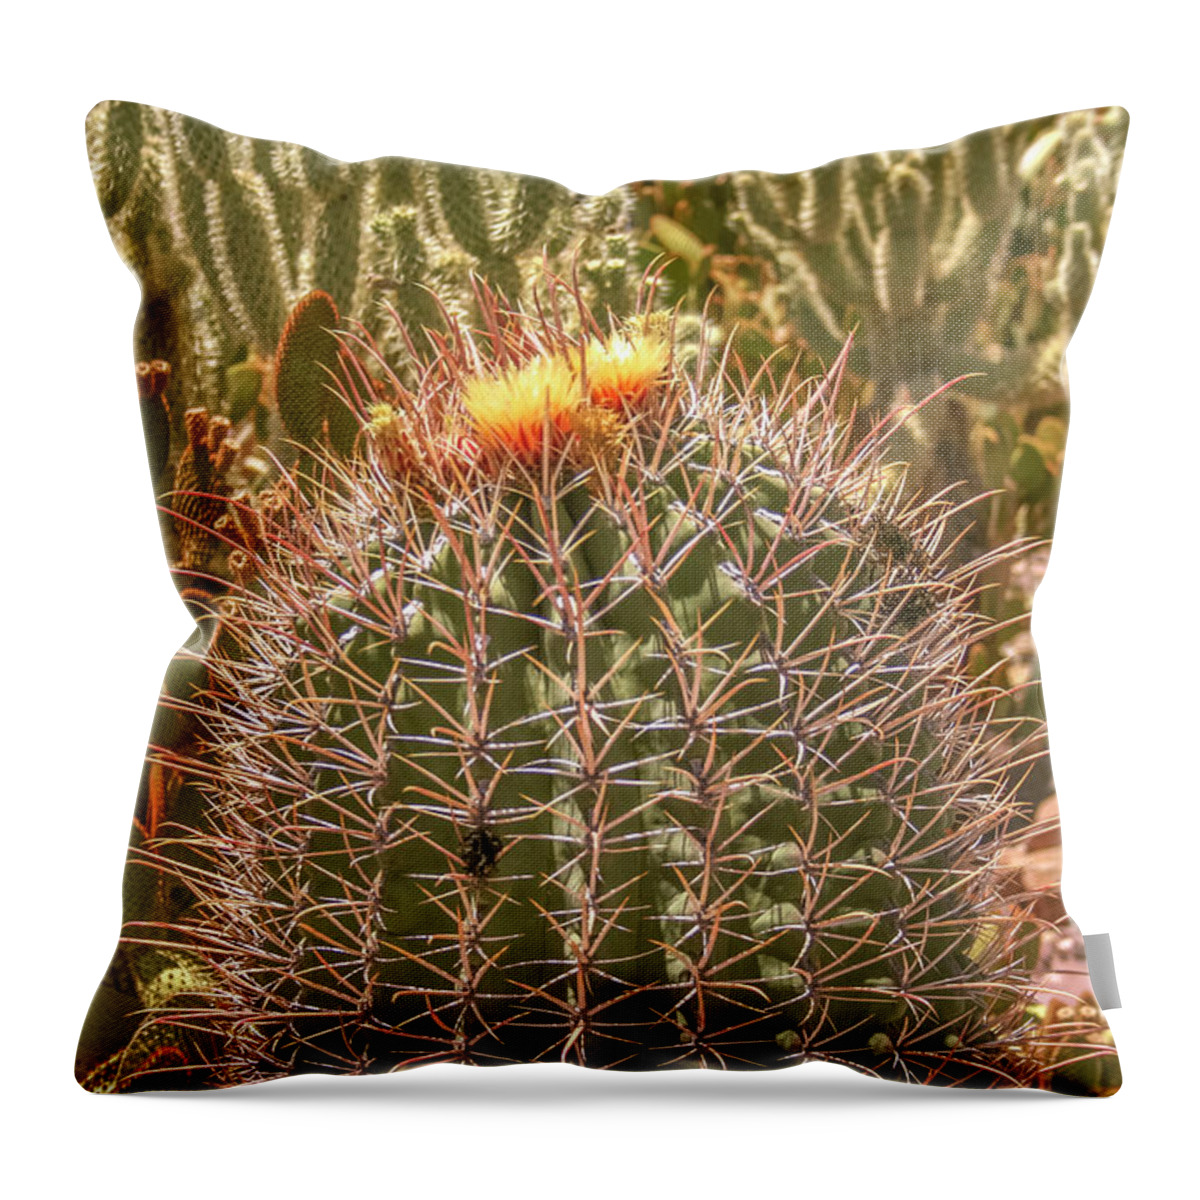 Cactus Throw Pillow featuring the photograph Cactus yellowtop by Darrell Foster